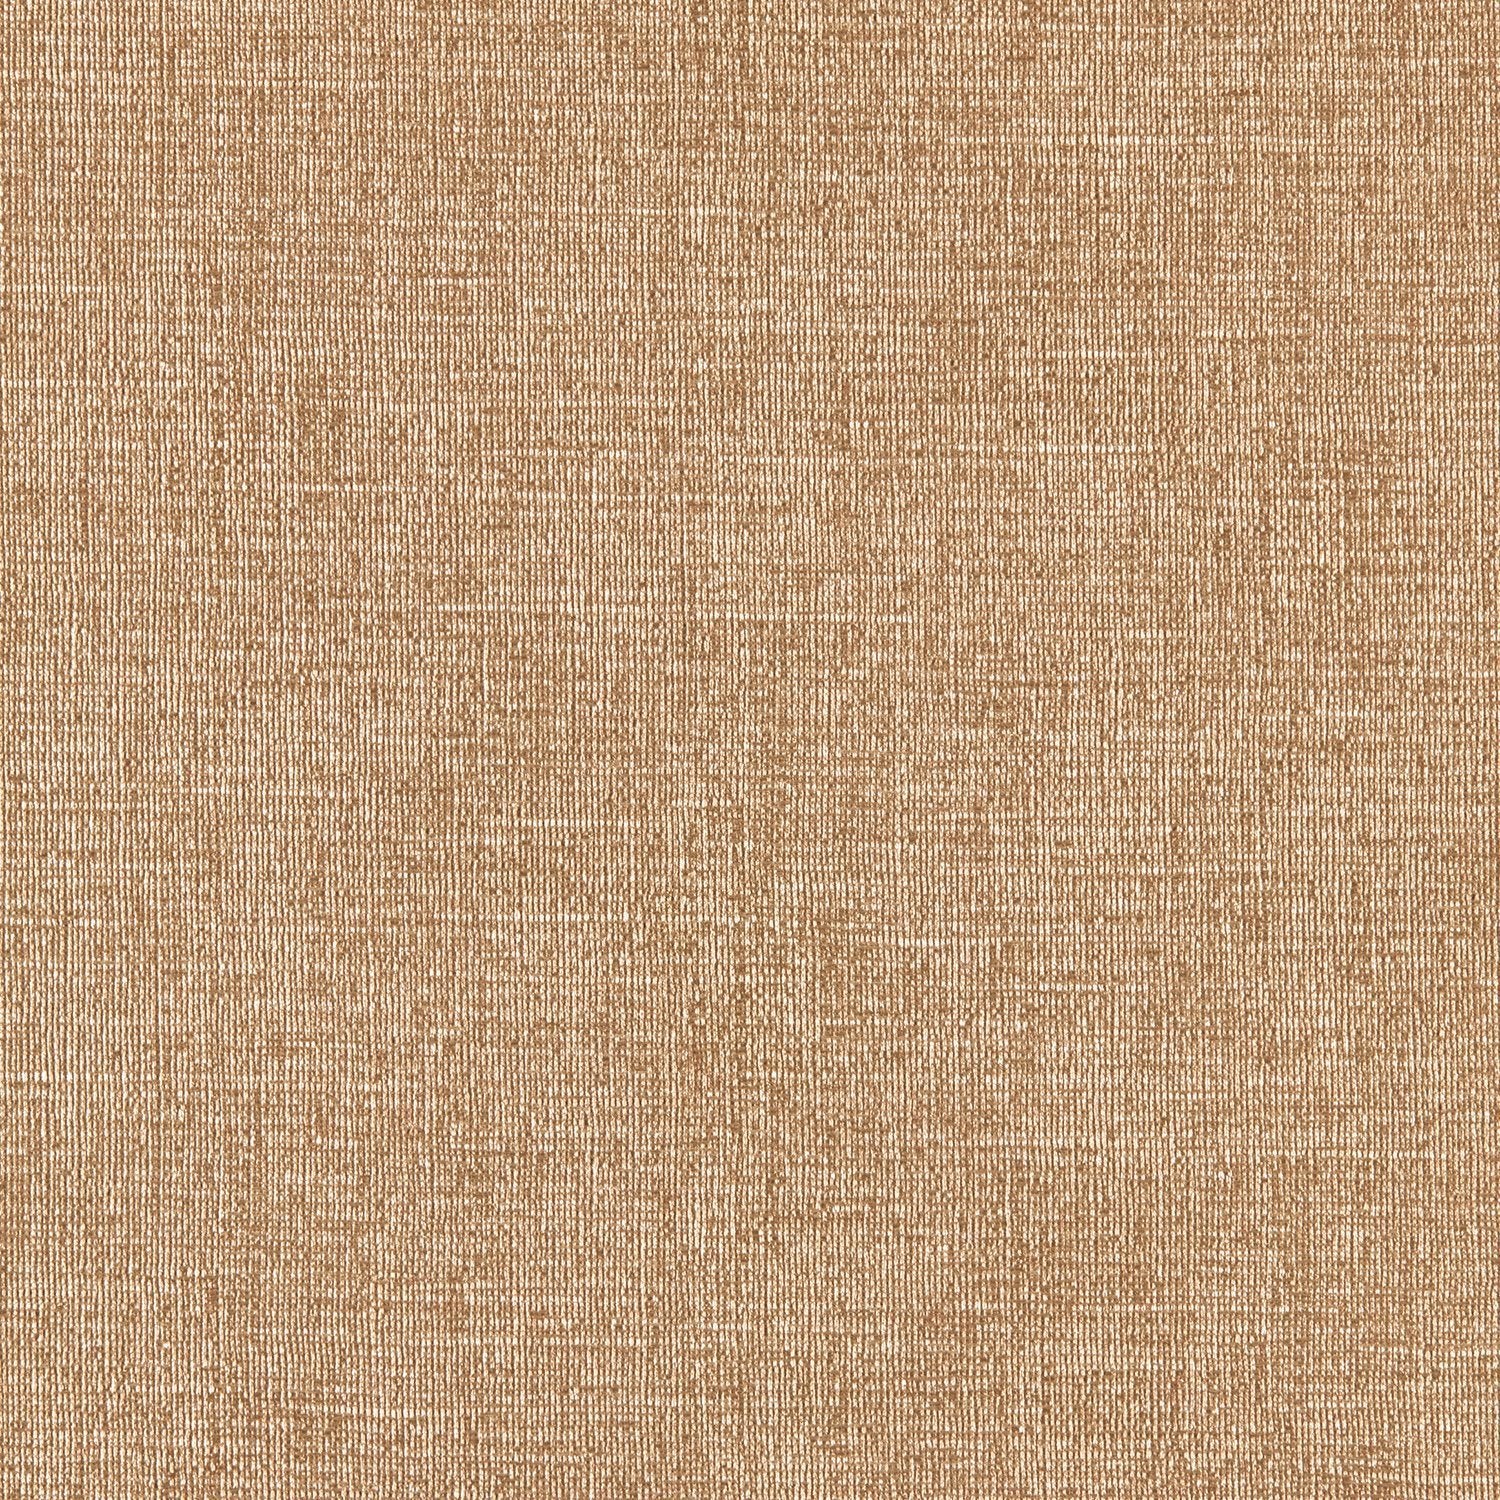 Spectrum - Y46919 - Wallcovering - Vycon - Kube Contract